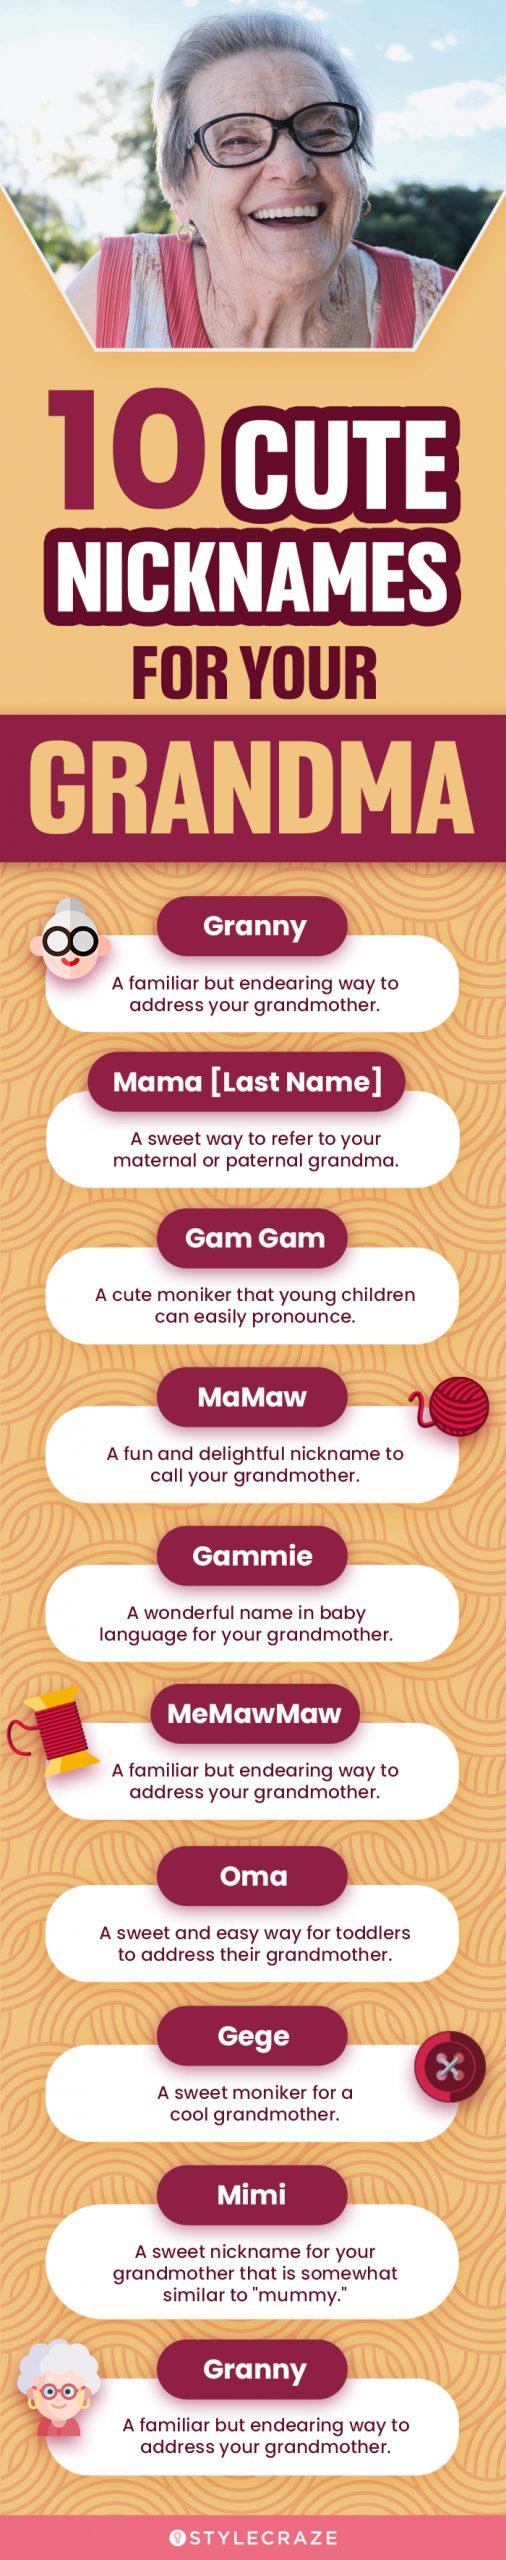 101 Nicknames For Grandma That Suit Her Unique Personality